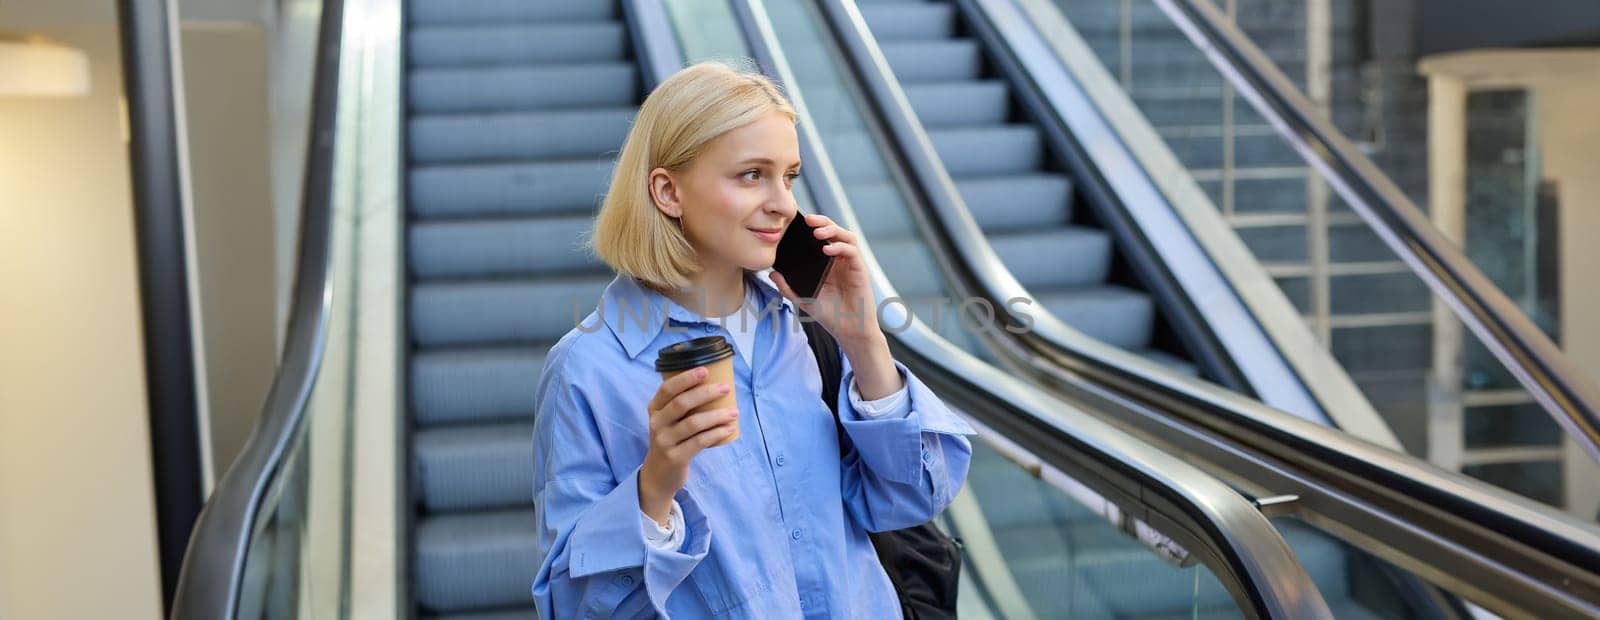 Lifestyle shot of young female student, woman talking on mobile phone, drinking coffee, standing near escalator in city centre.